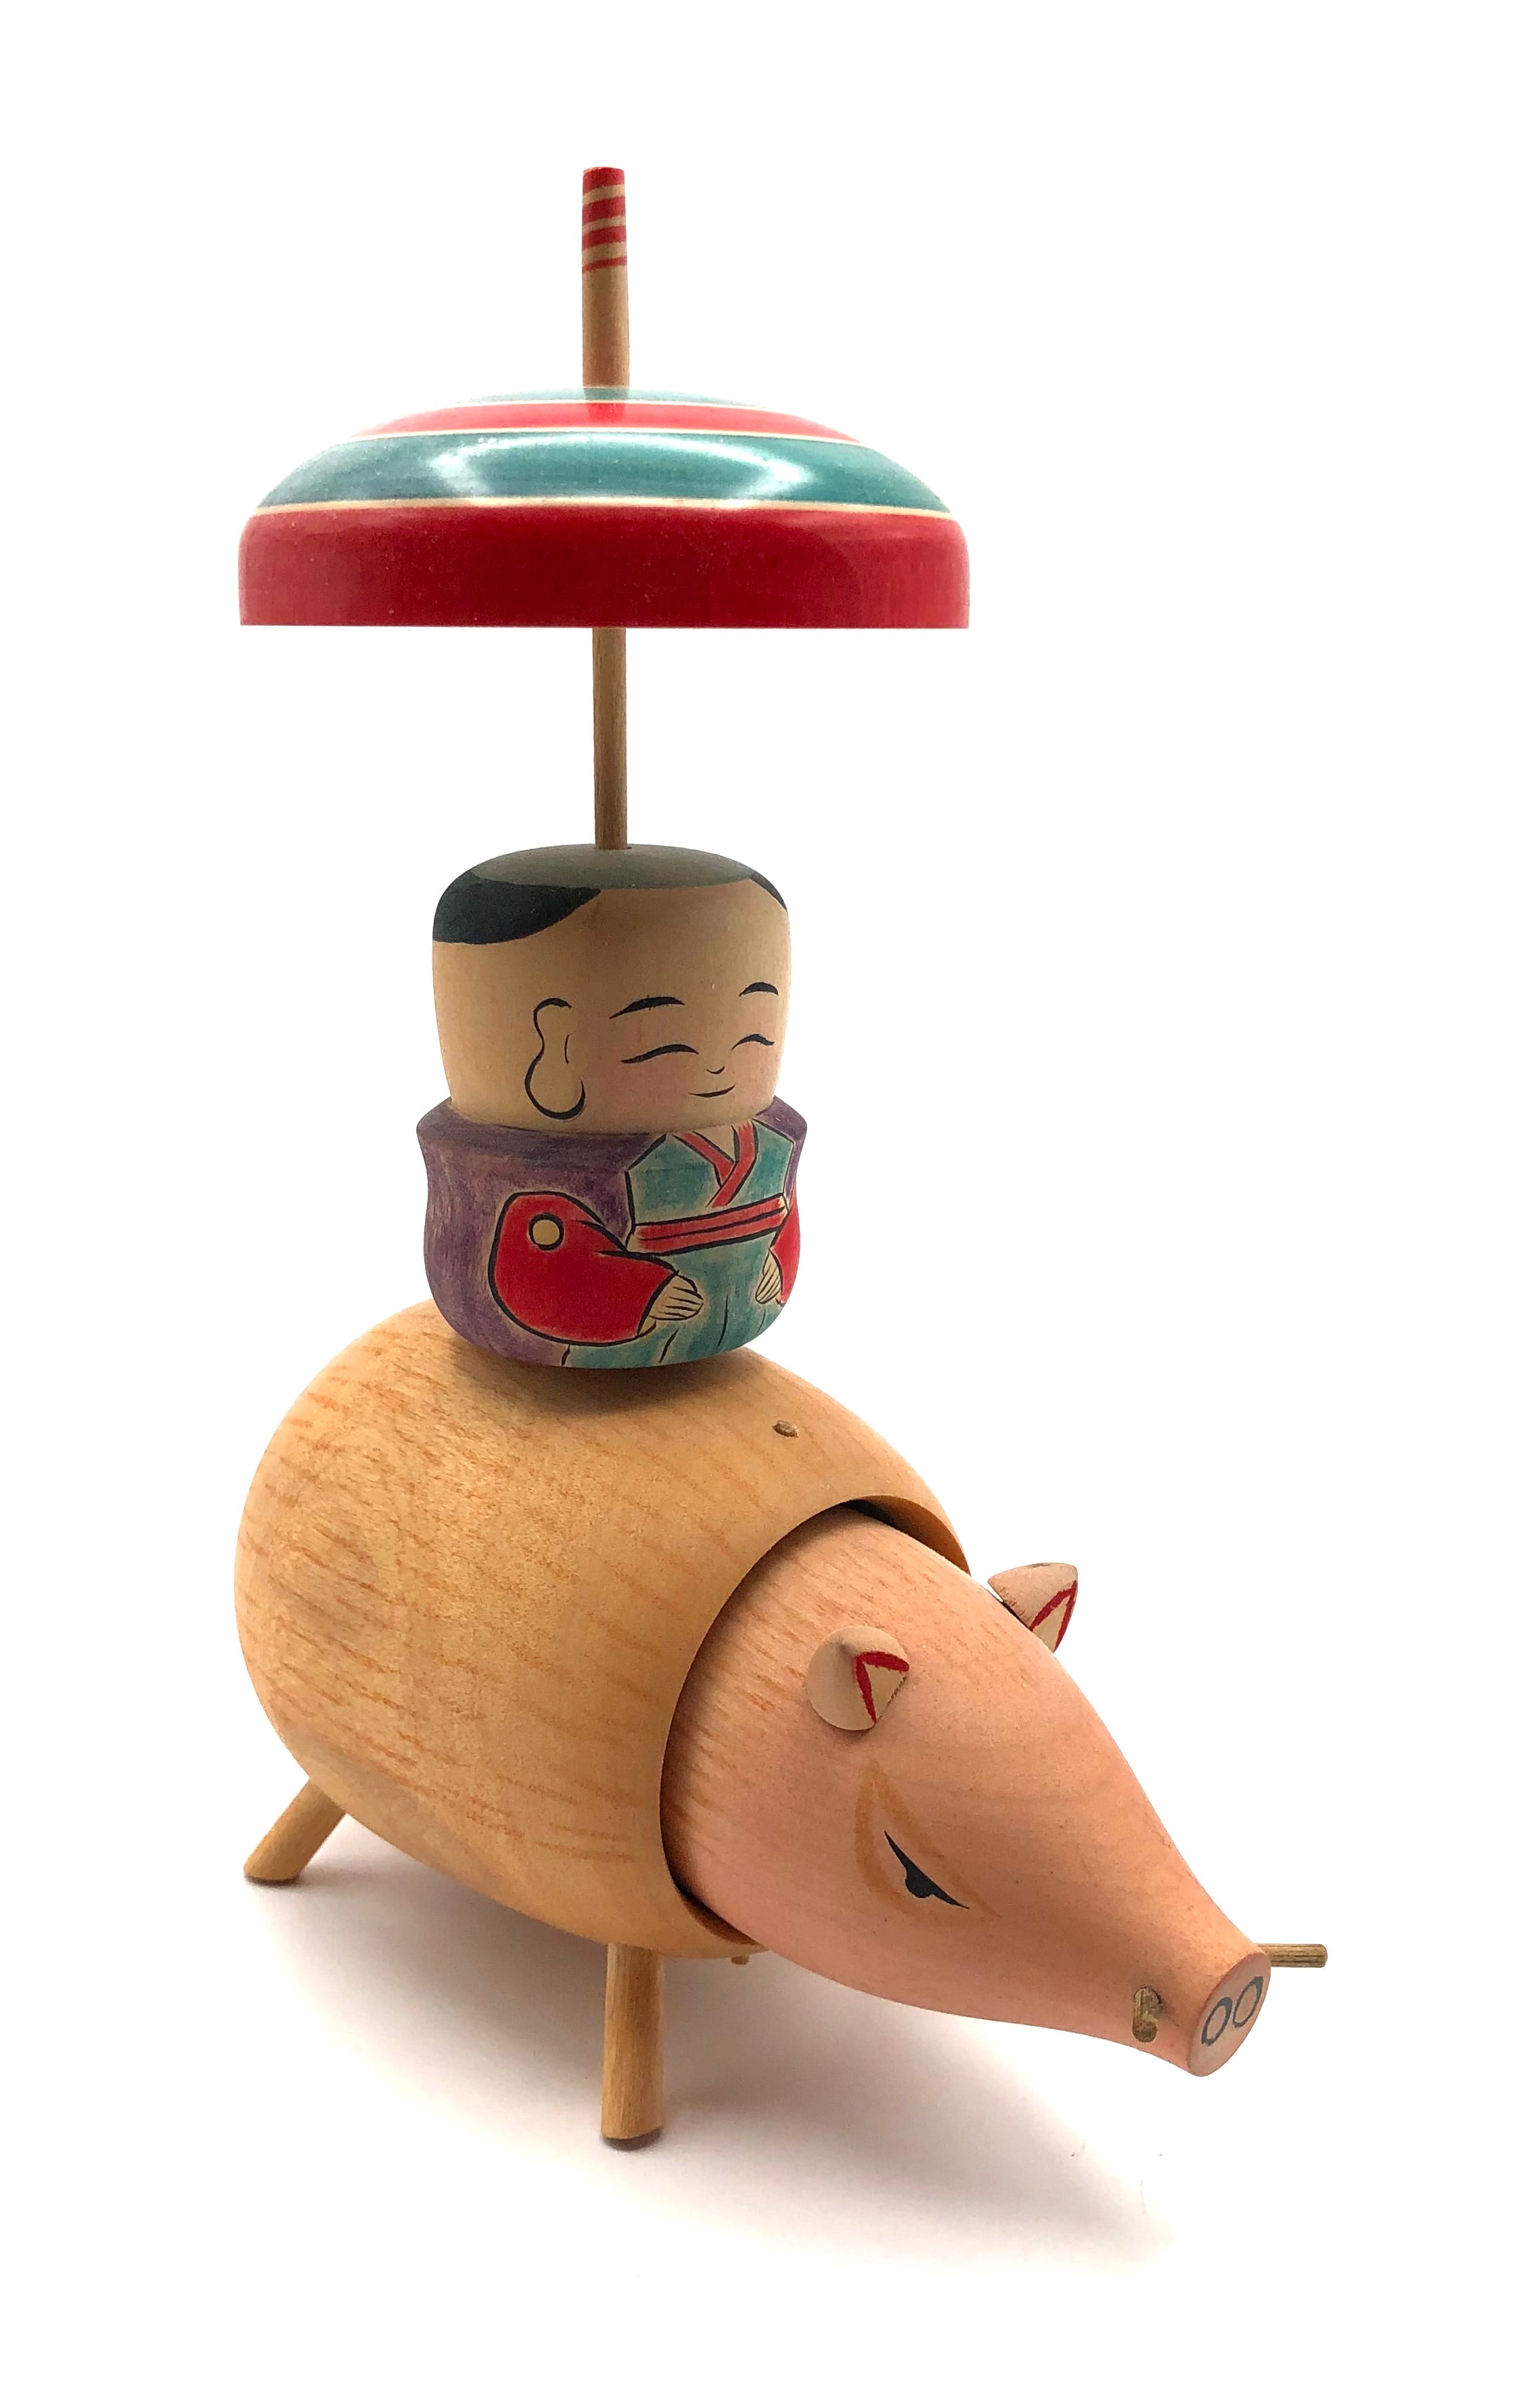 Vintage Japanese Lathe-Turned Young Lord Riding a Boar Spinning Top by Hiroi, Masaaki